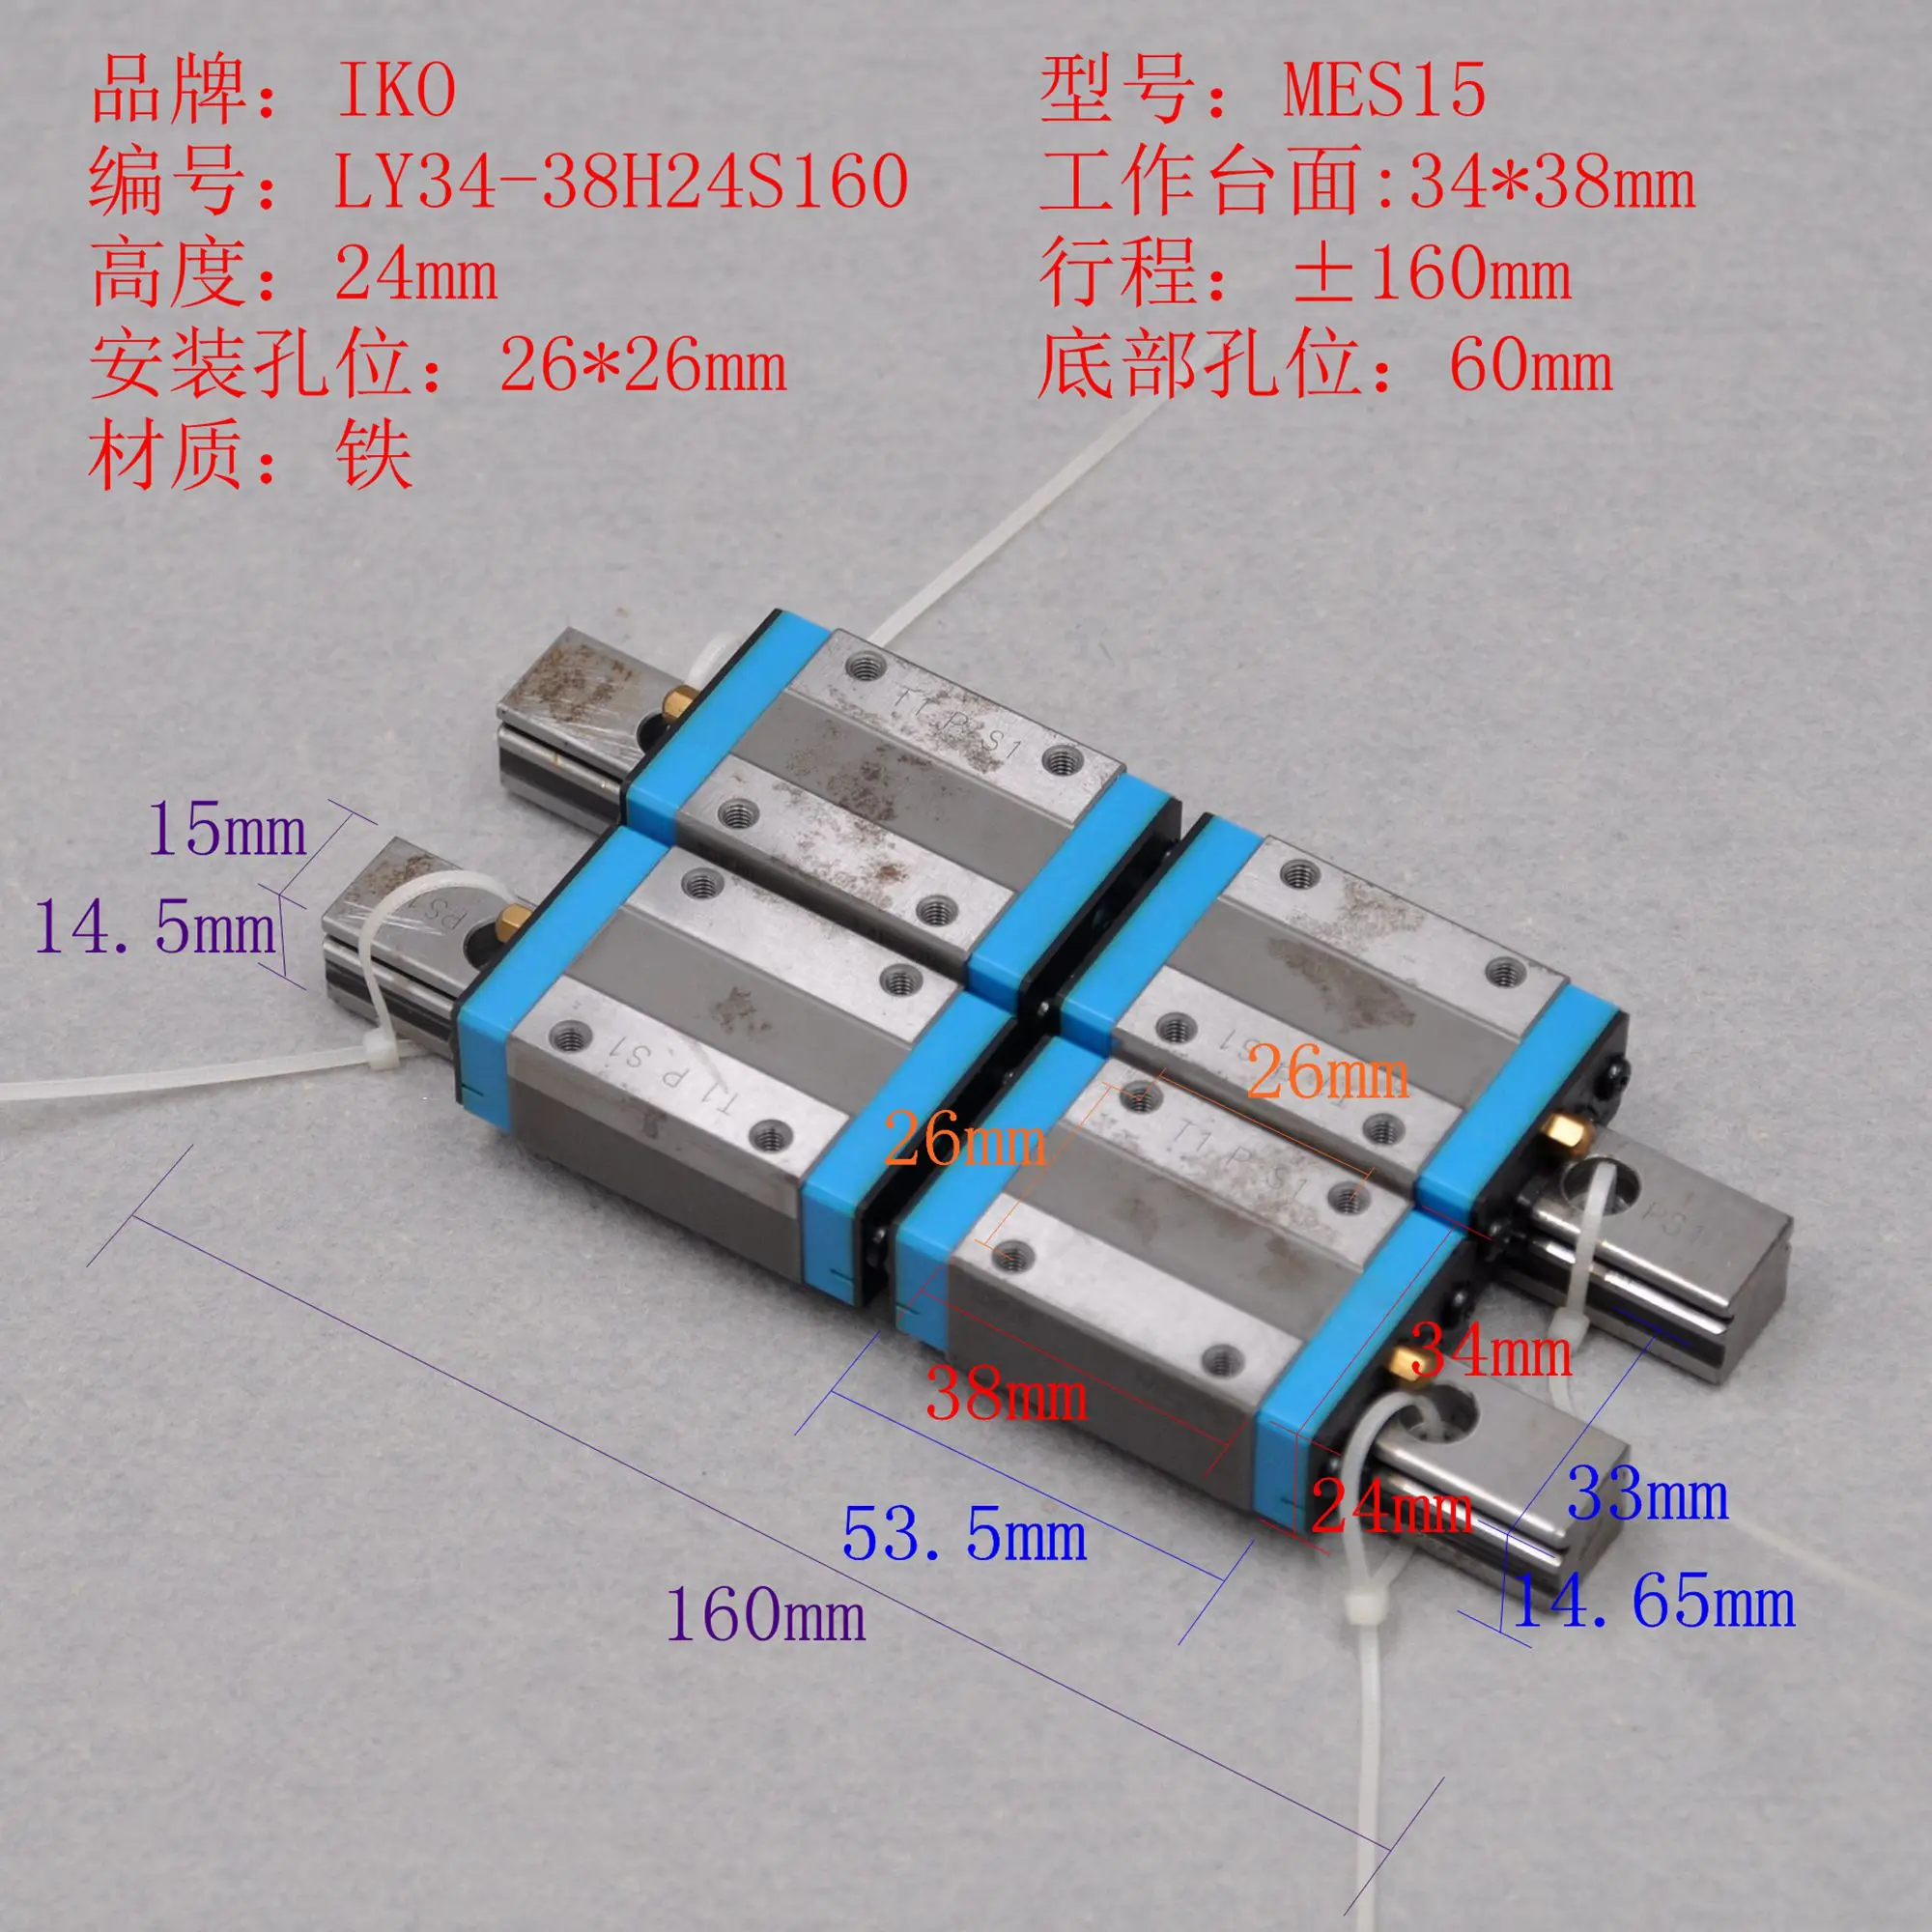 IKO MES15 linear guide